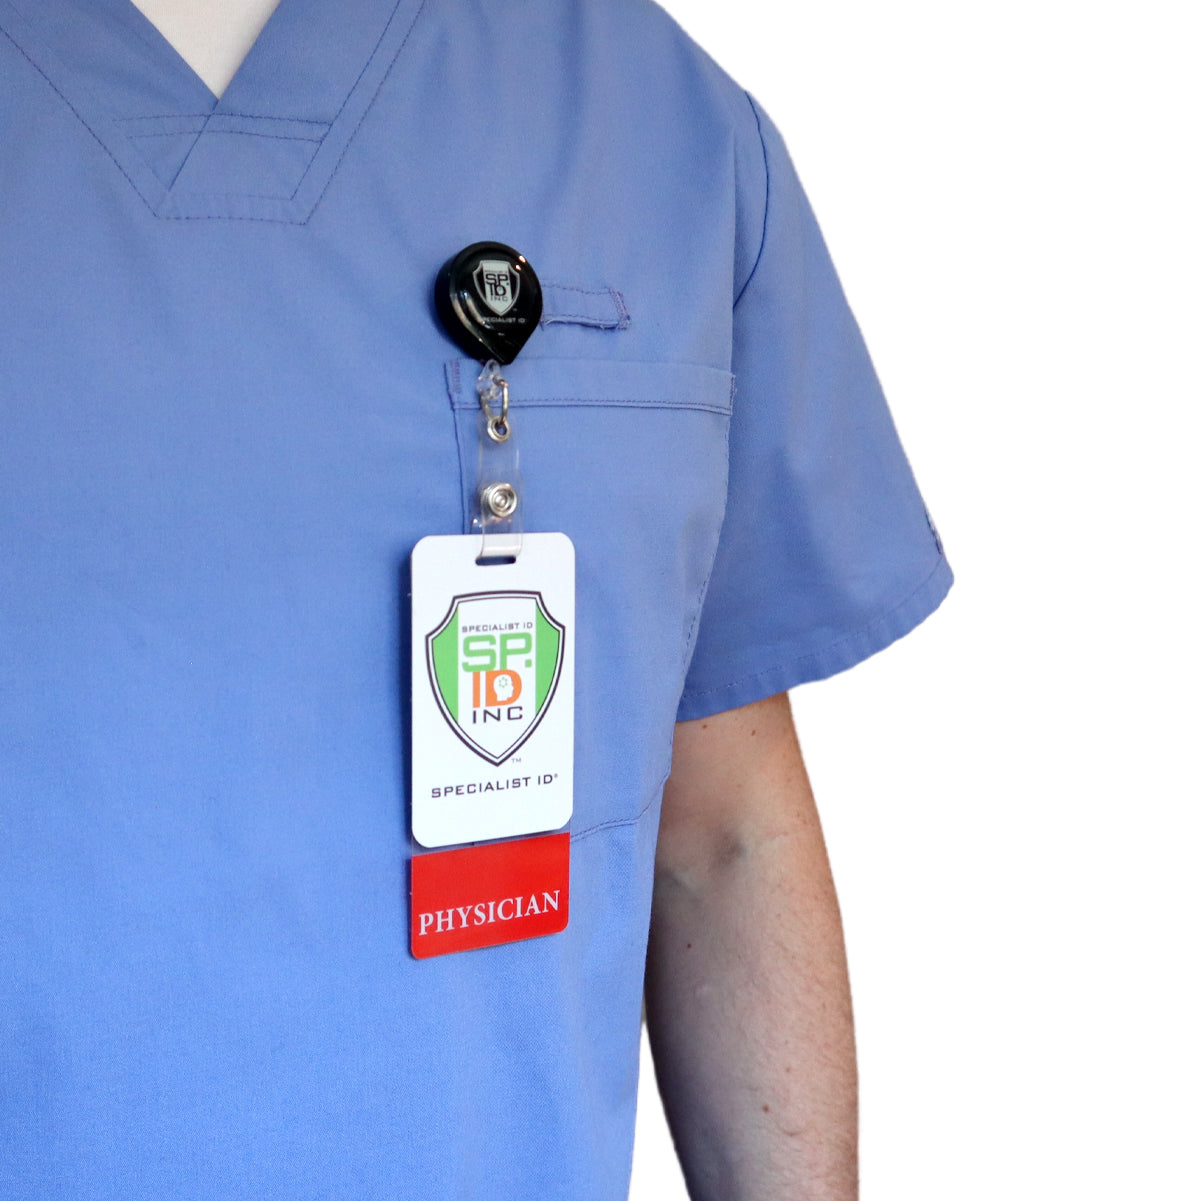 Clear PHYSICIAN Badge Buddy Vertical with Red Border for Physicians